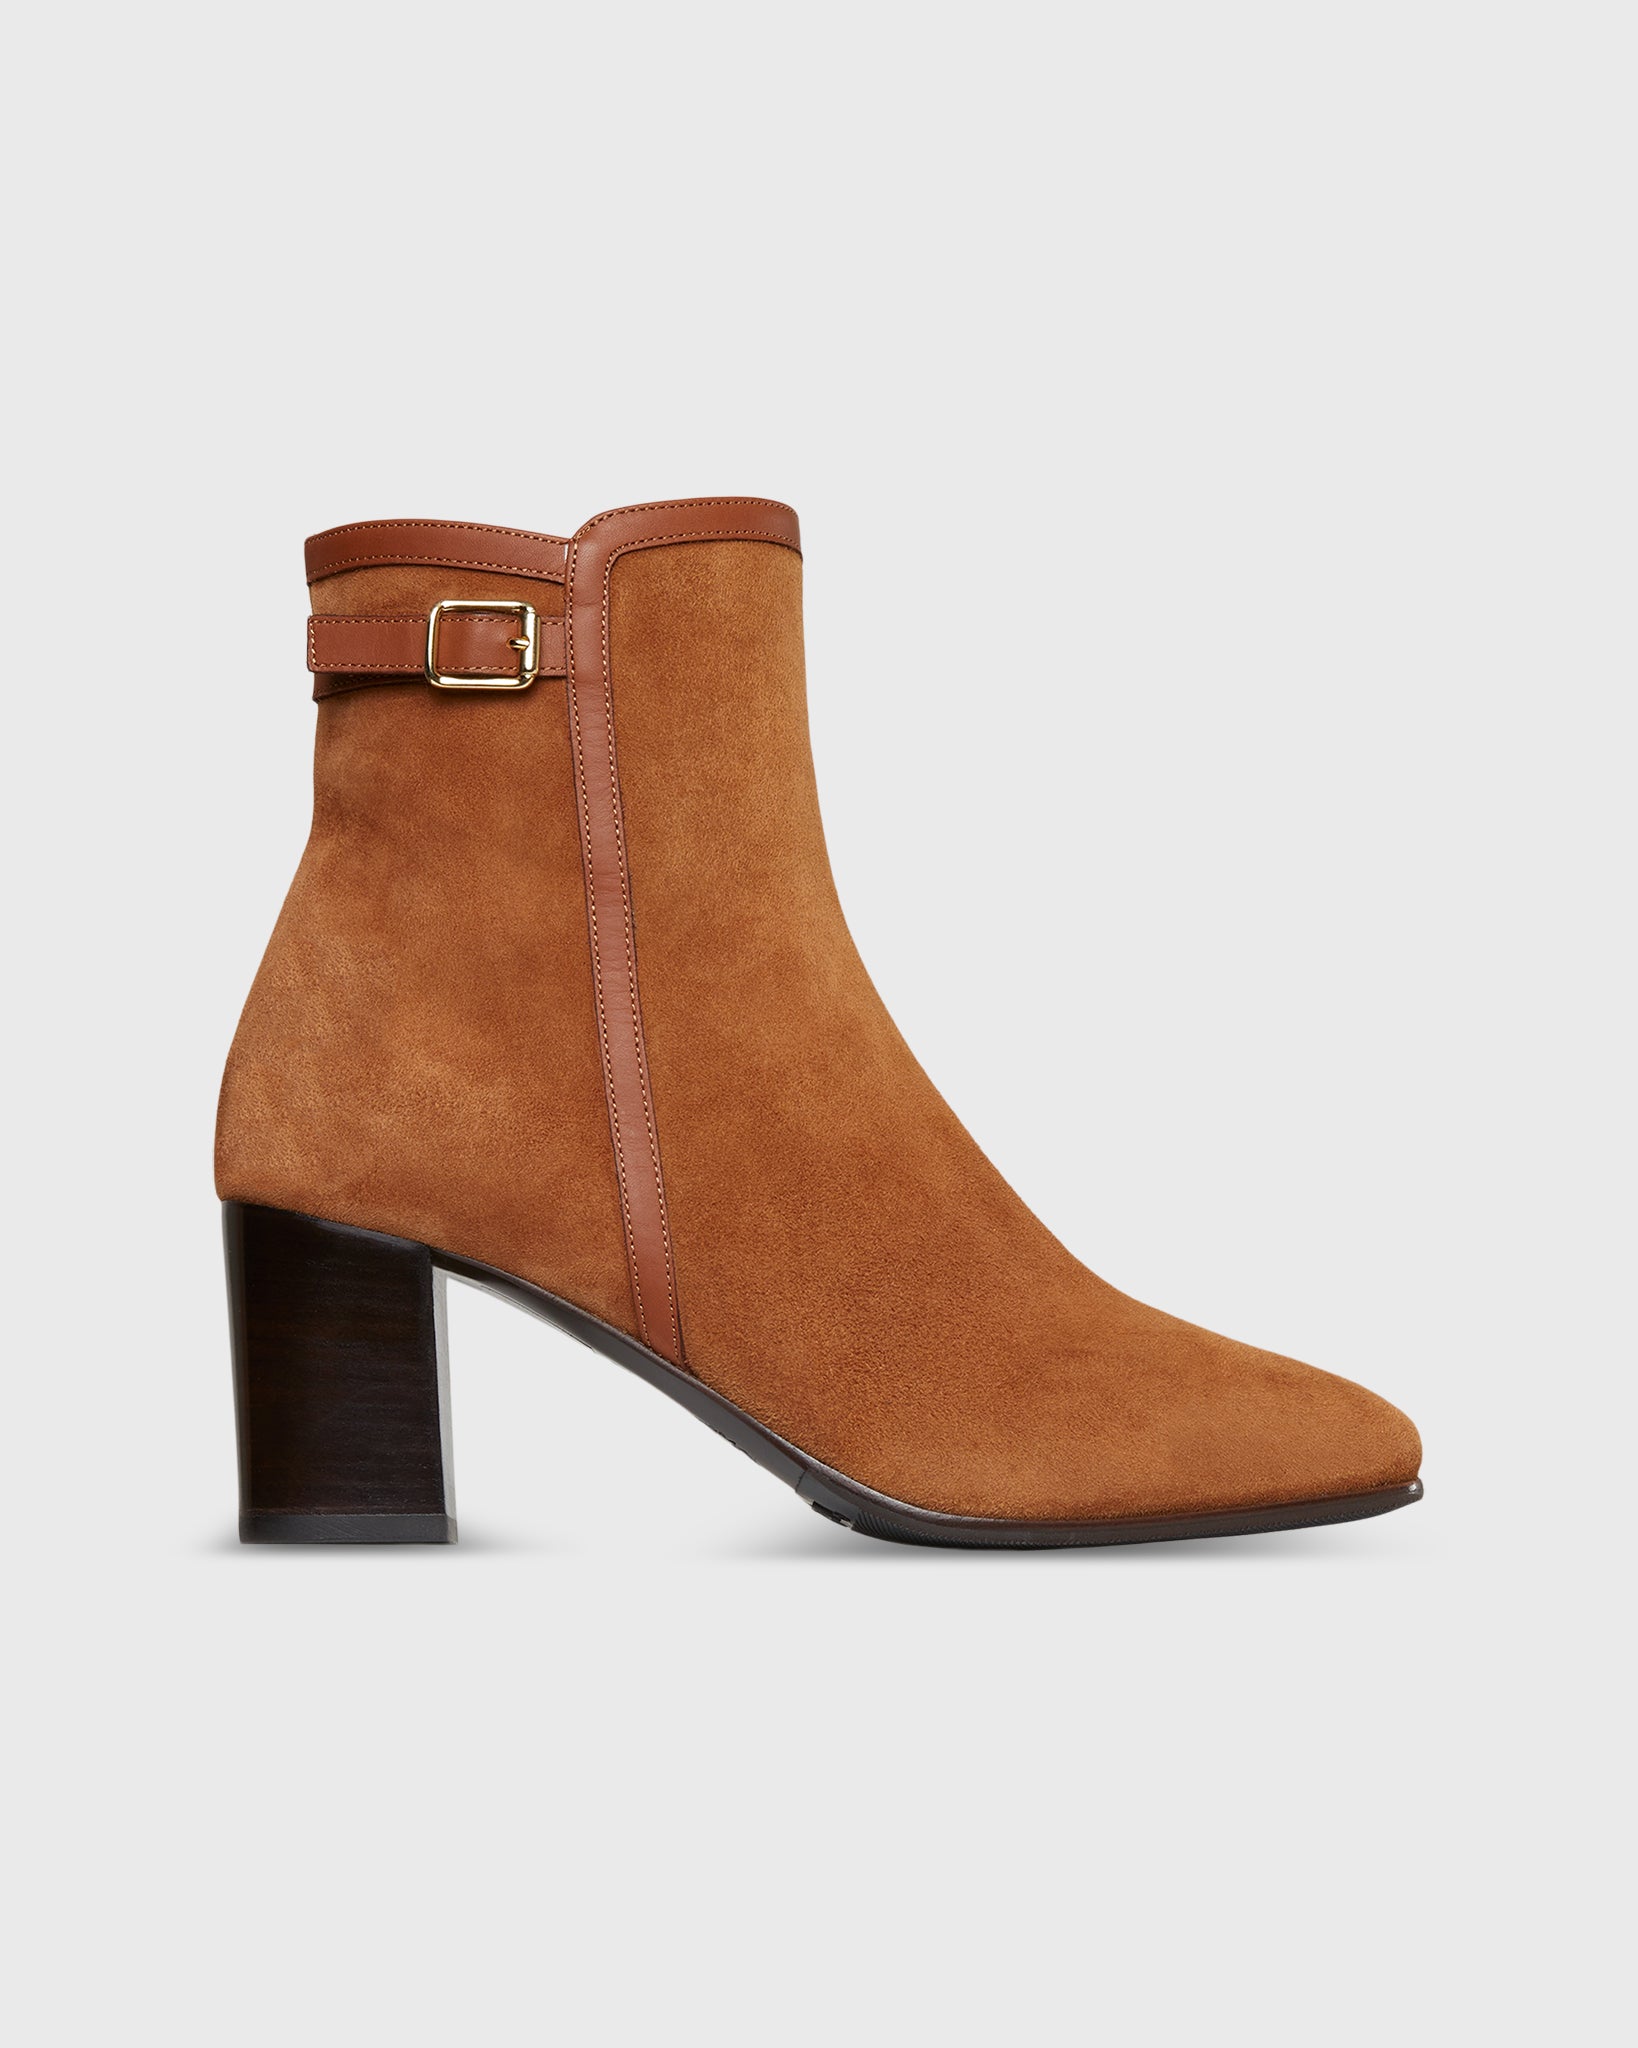 Buckle Ankle Boot in Brandy Suede